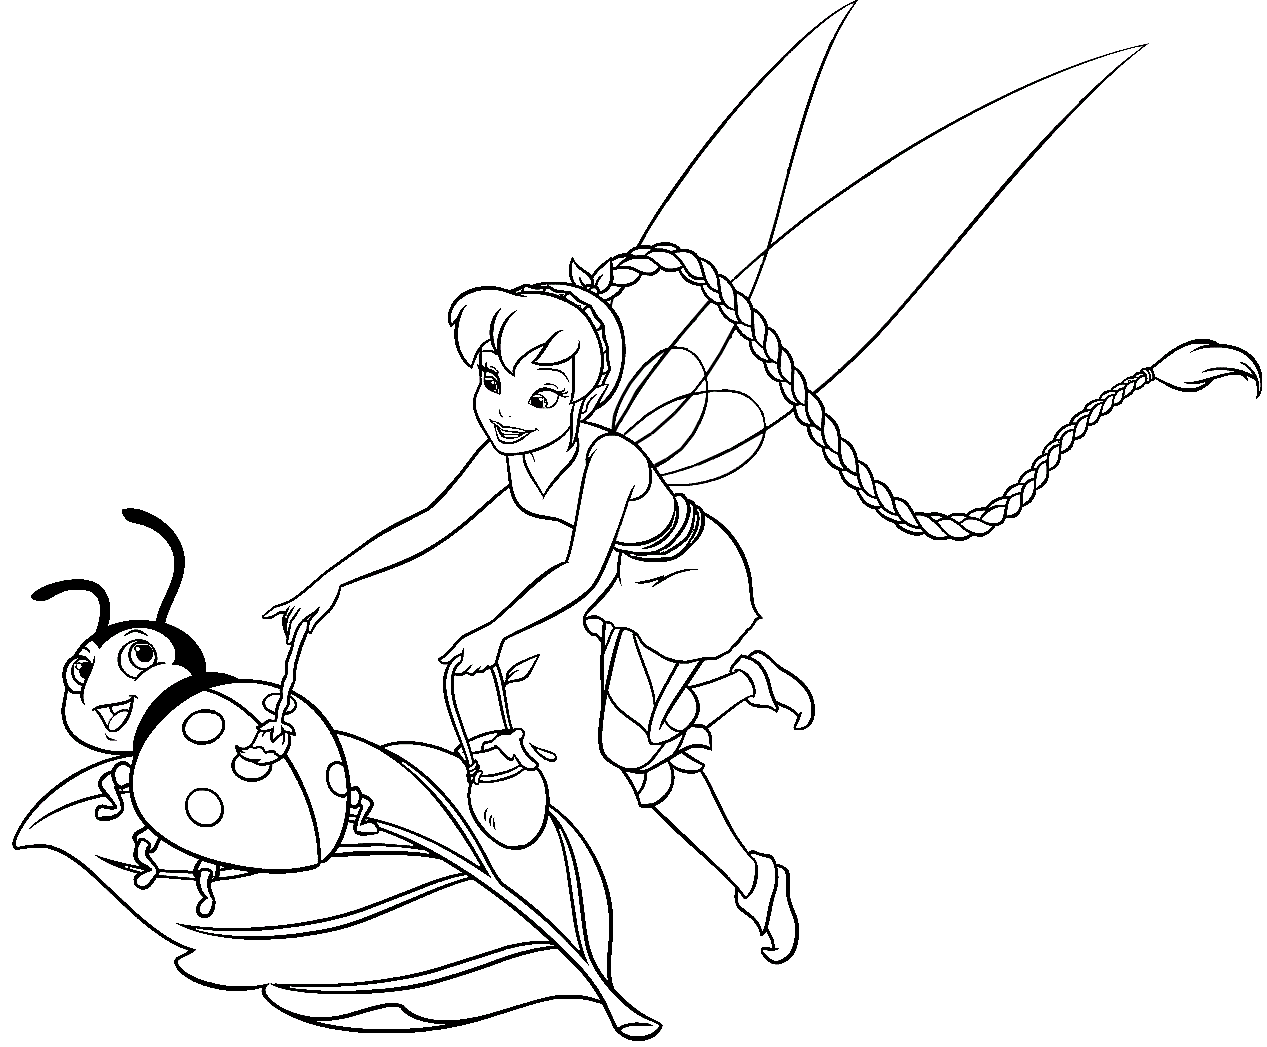 tinker-bell-coloring-pages-02